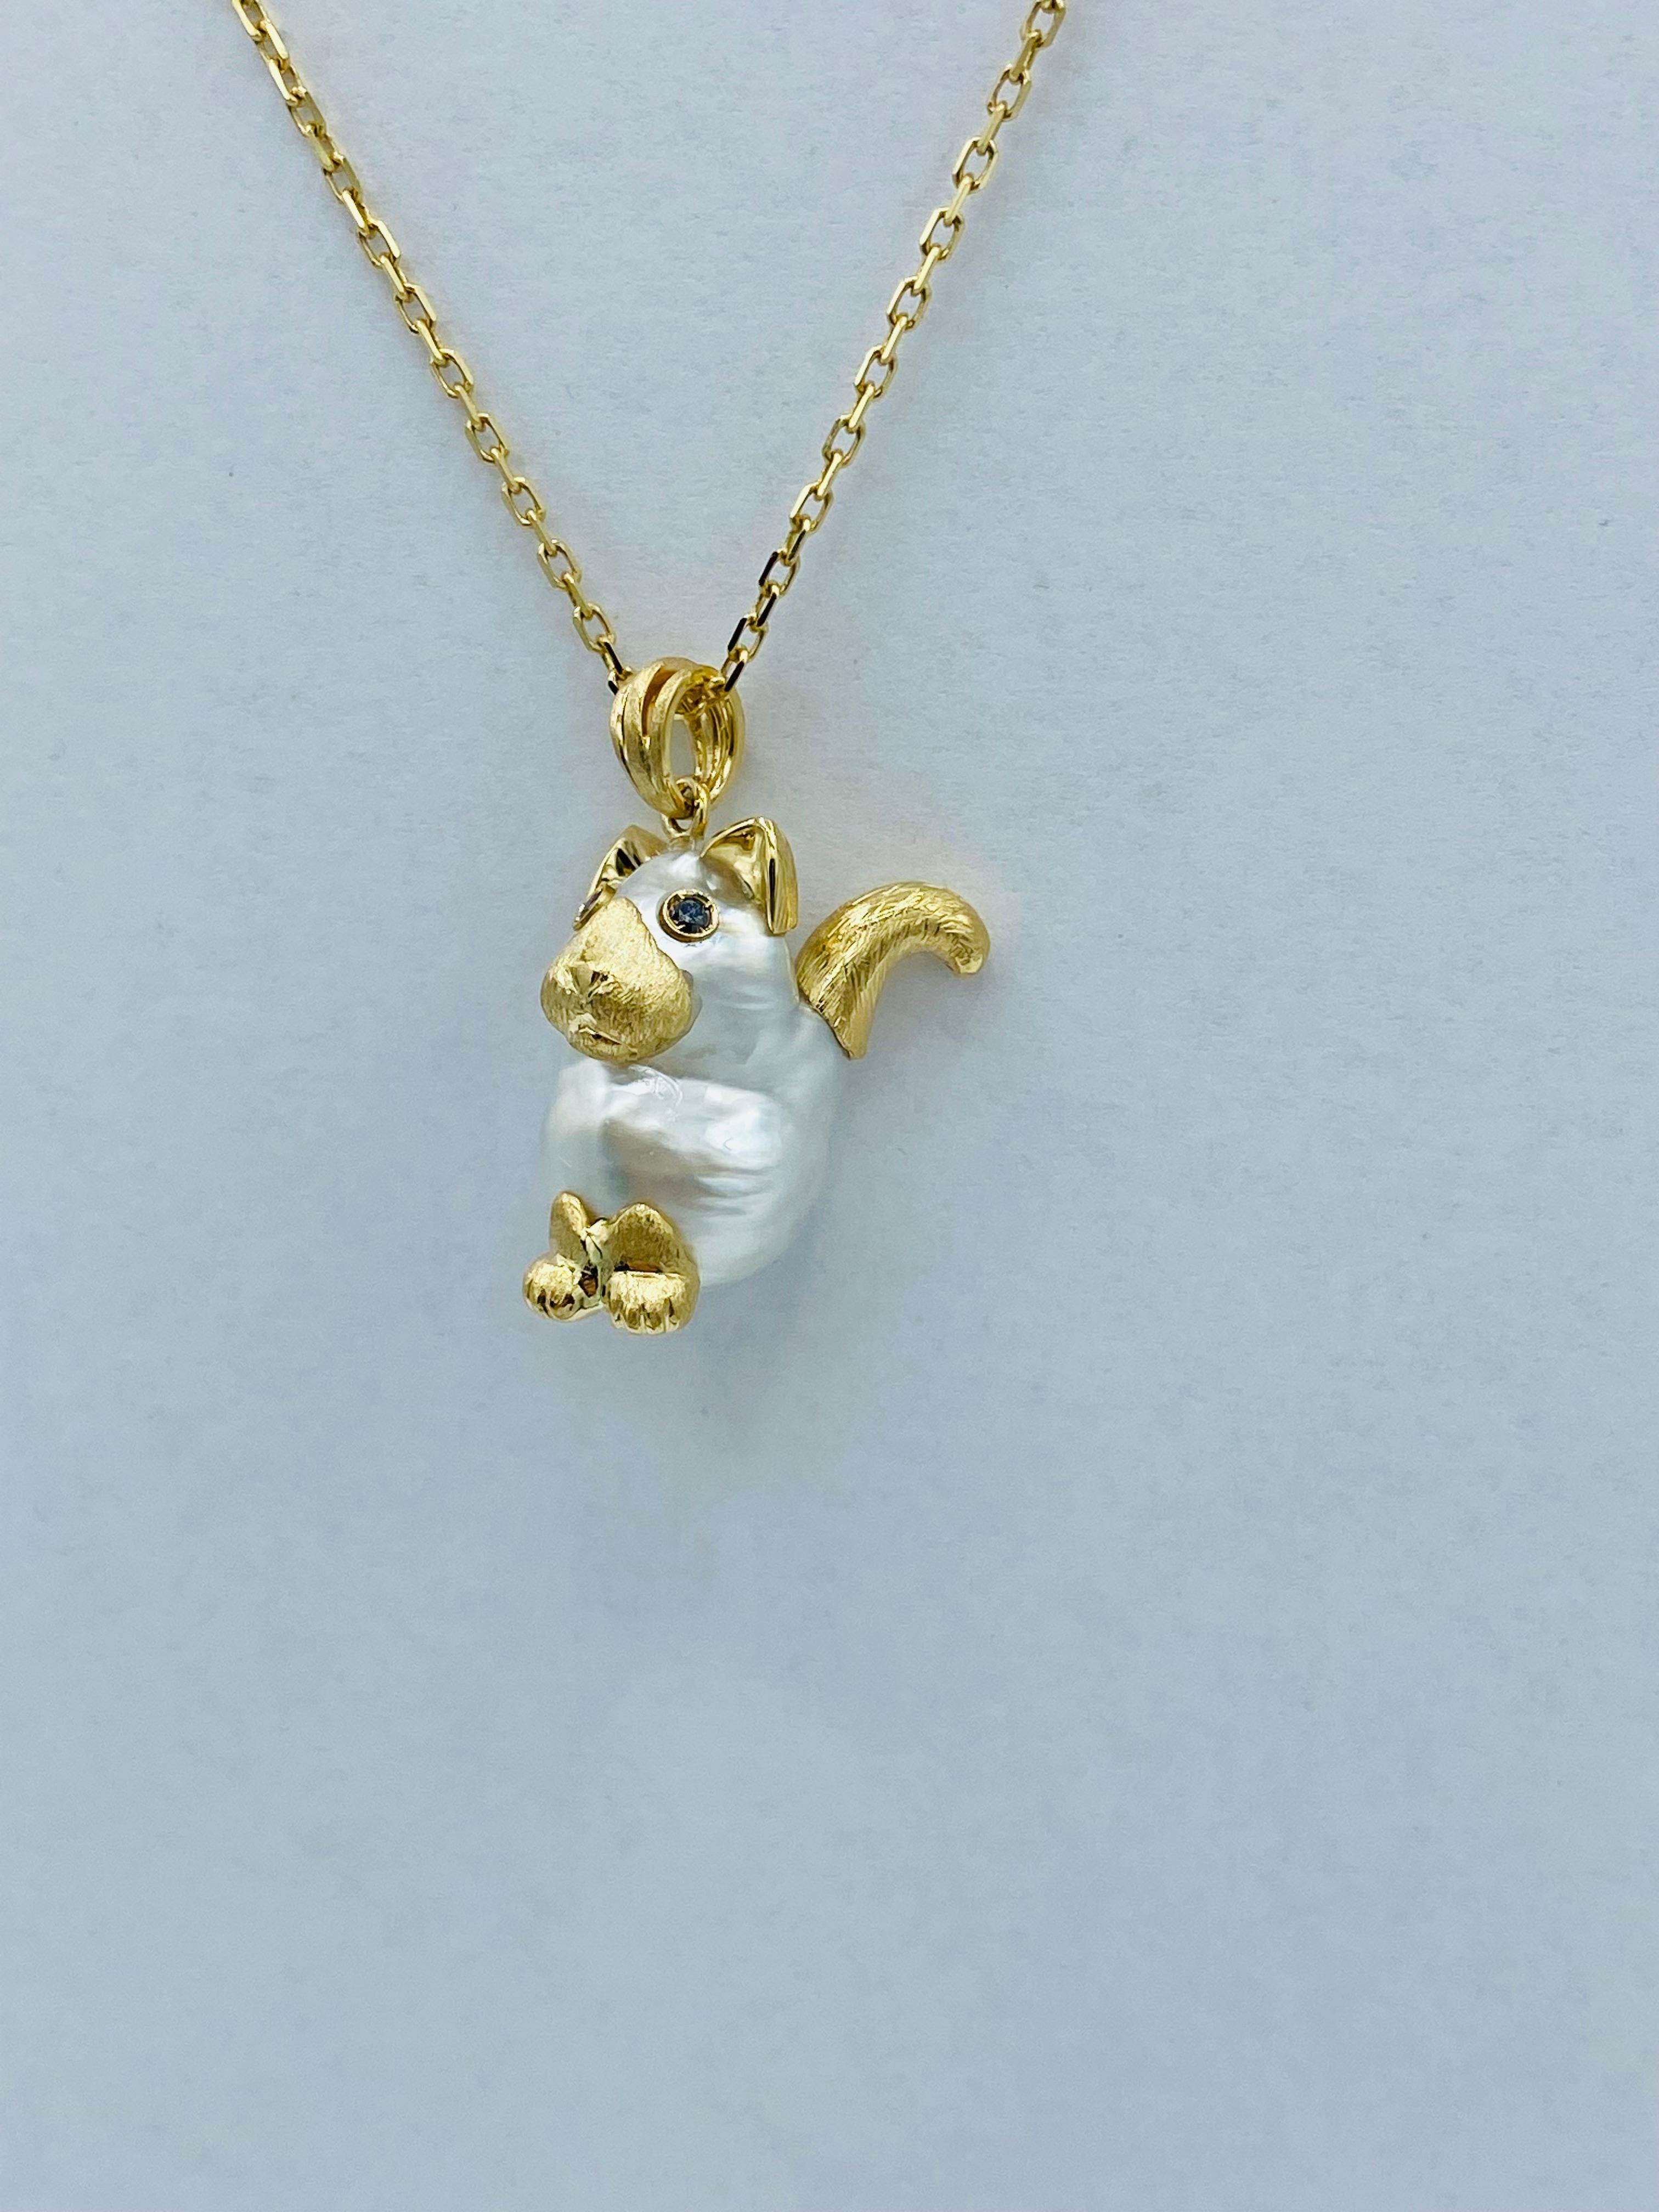 Cat Australian Pearl 18Kt Yellow Gold Pendant/ Necklace Black Diamond
I made this cute kitty, inspired by the shape of this Australian pearl. I added some 18Kt gold details: tail, ears, eyes, paws and nose. This pendant is completely handmade and